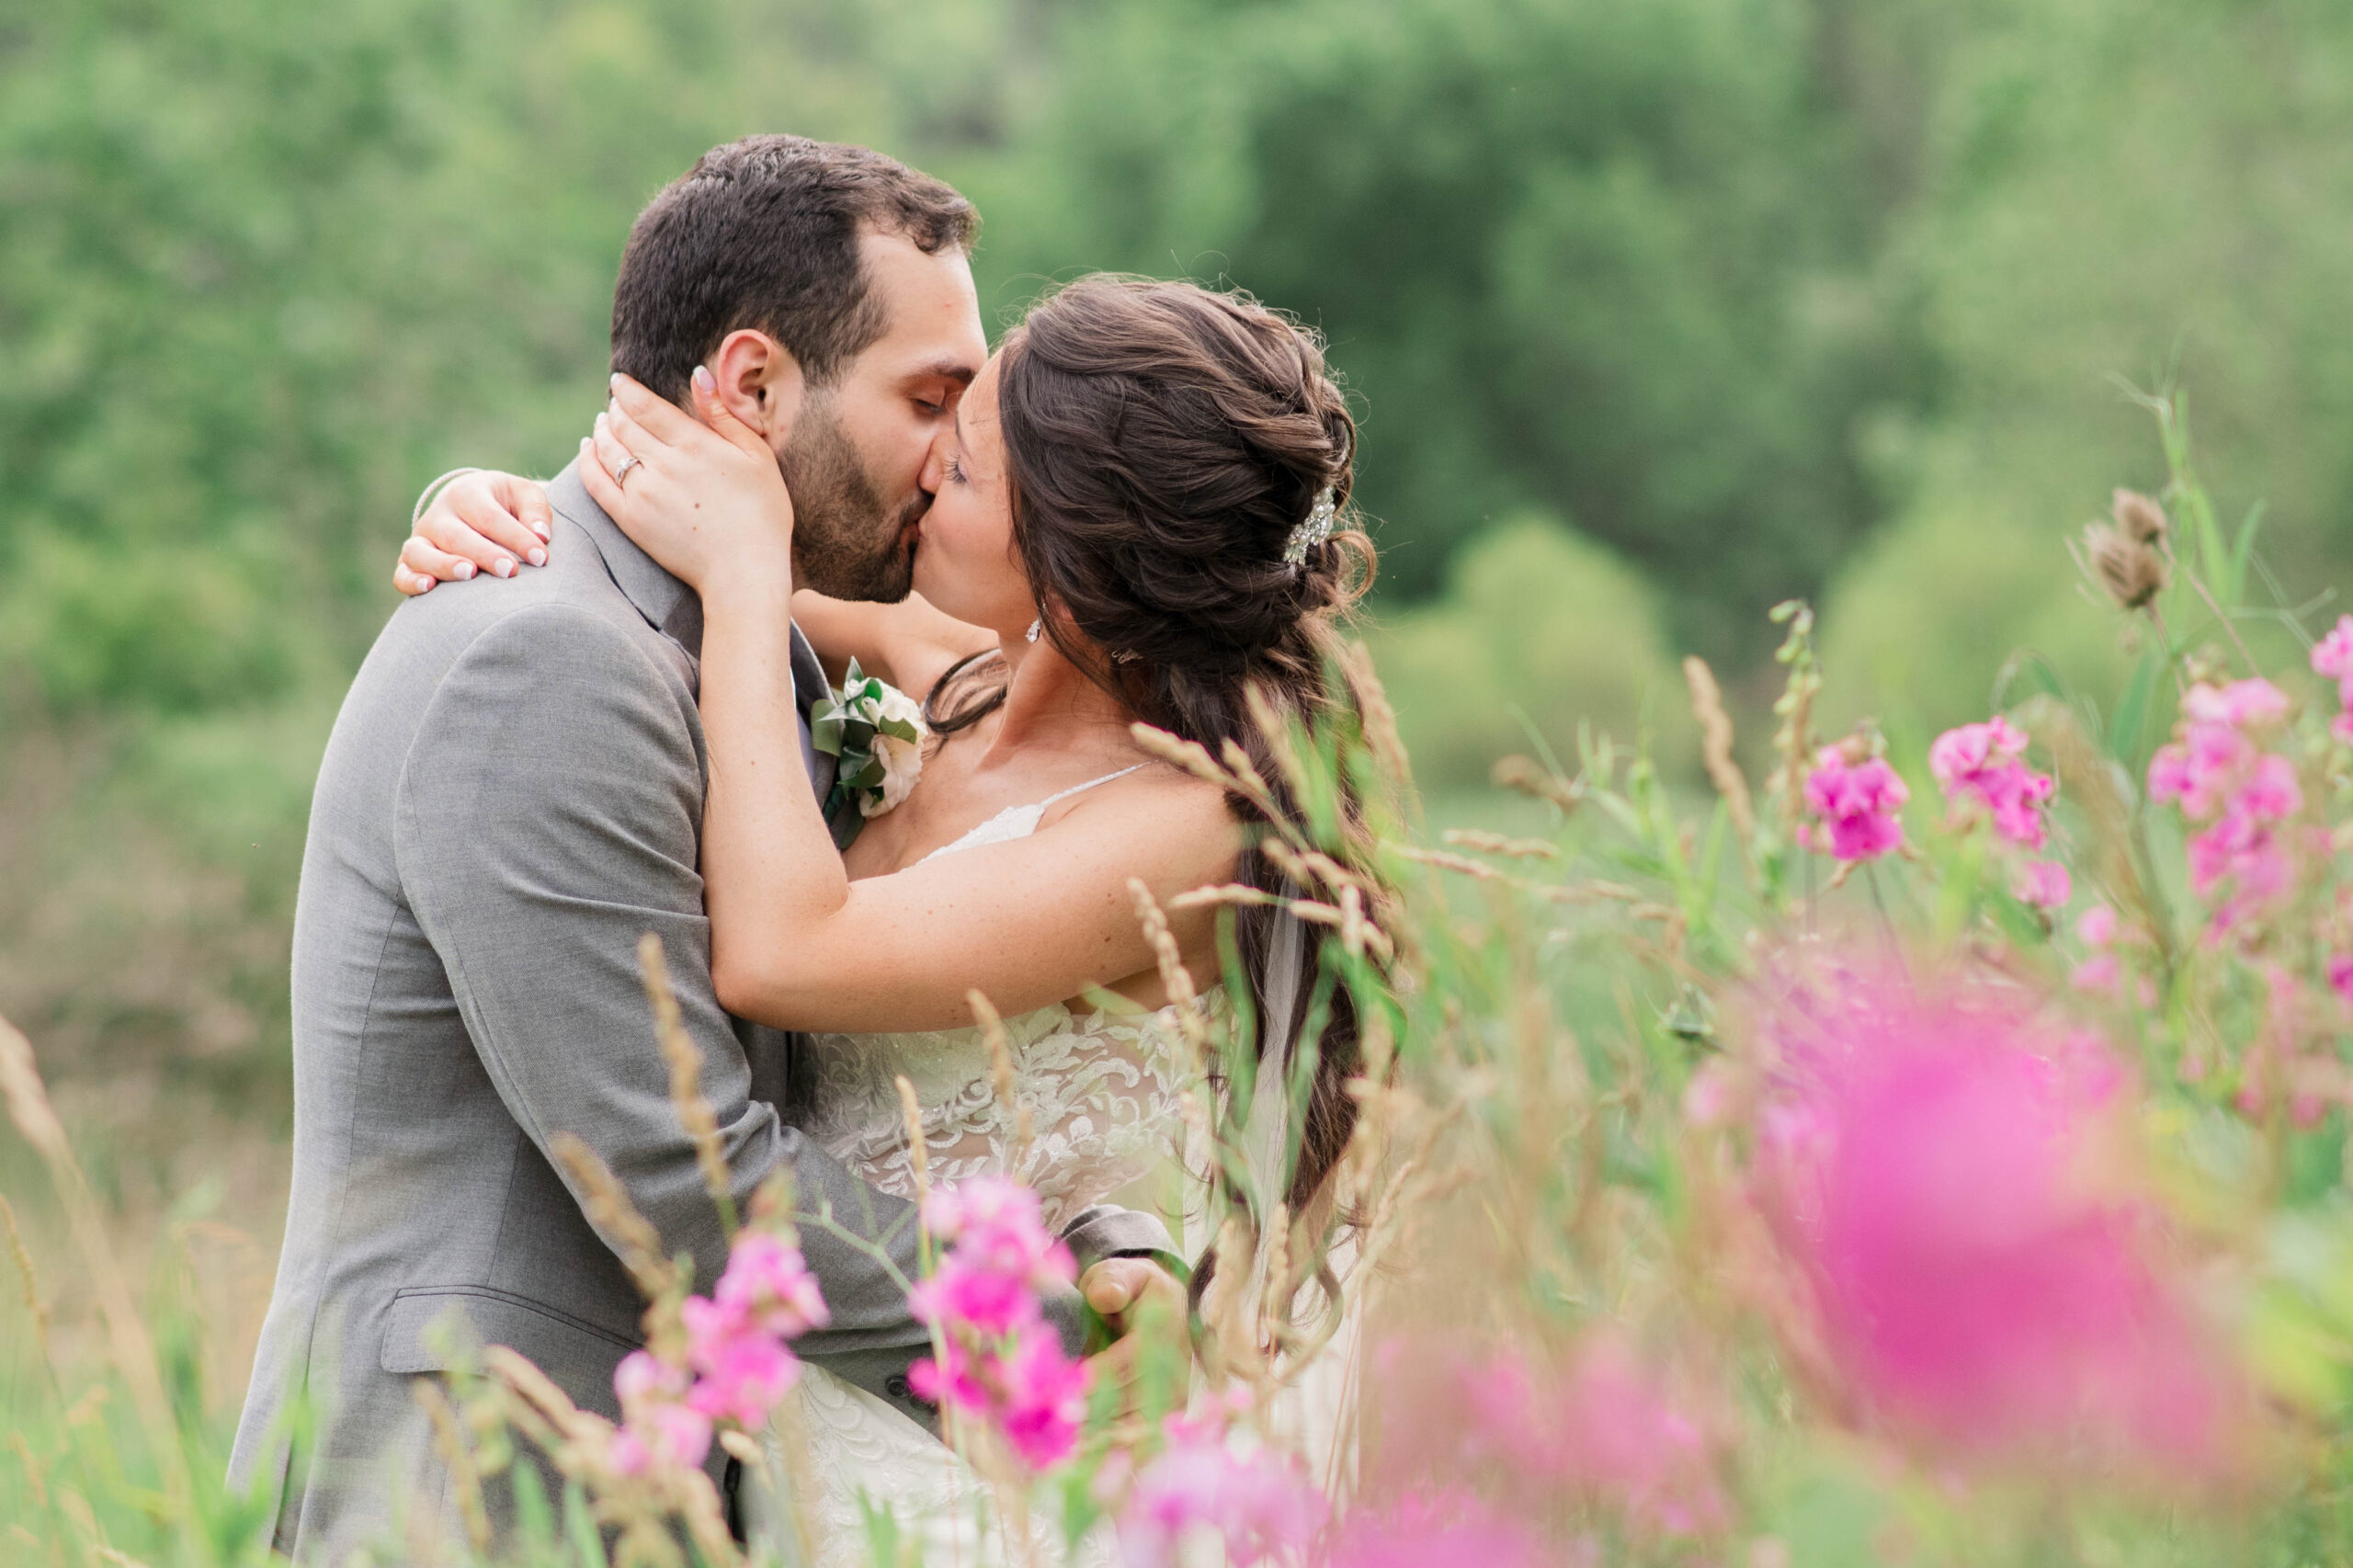 Wedding Photos in Altoona PA, Couple among tall grasses with purple flowers.